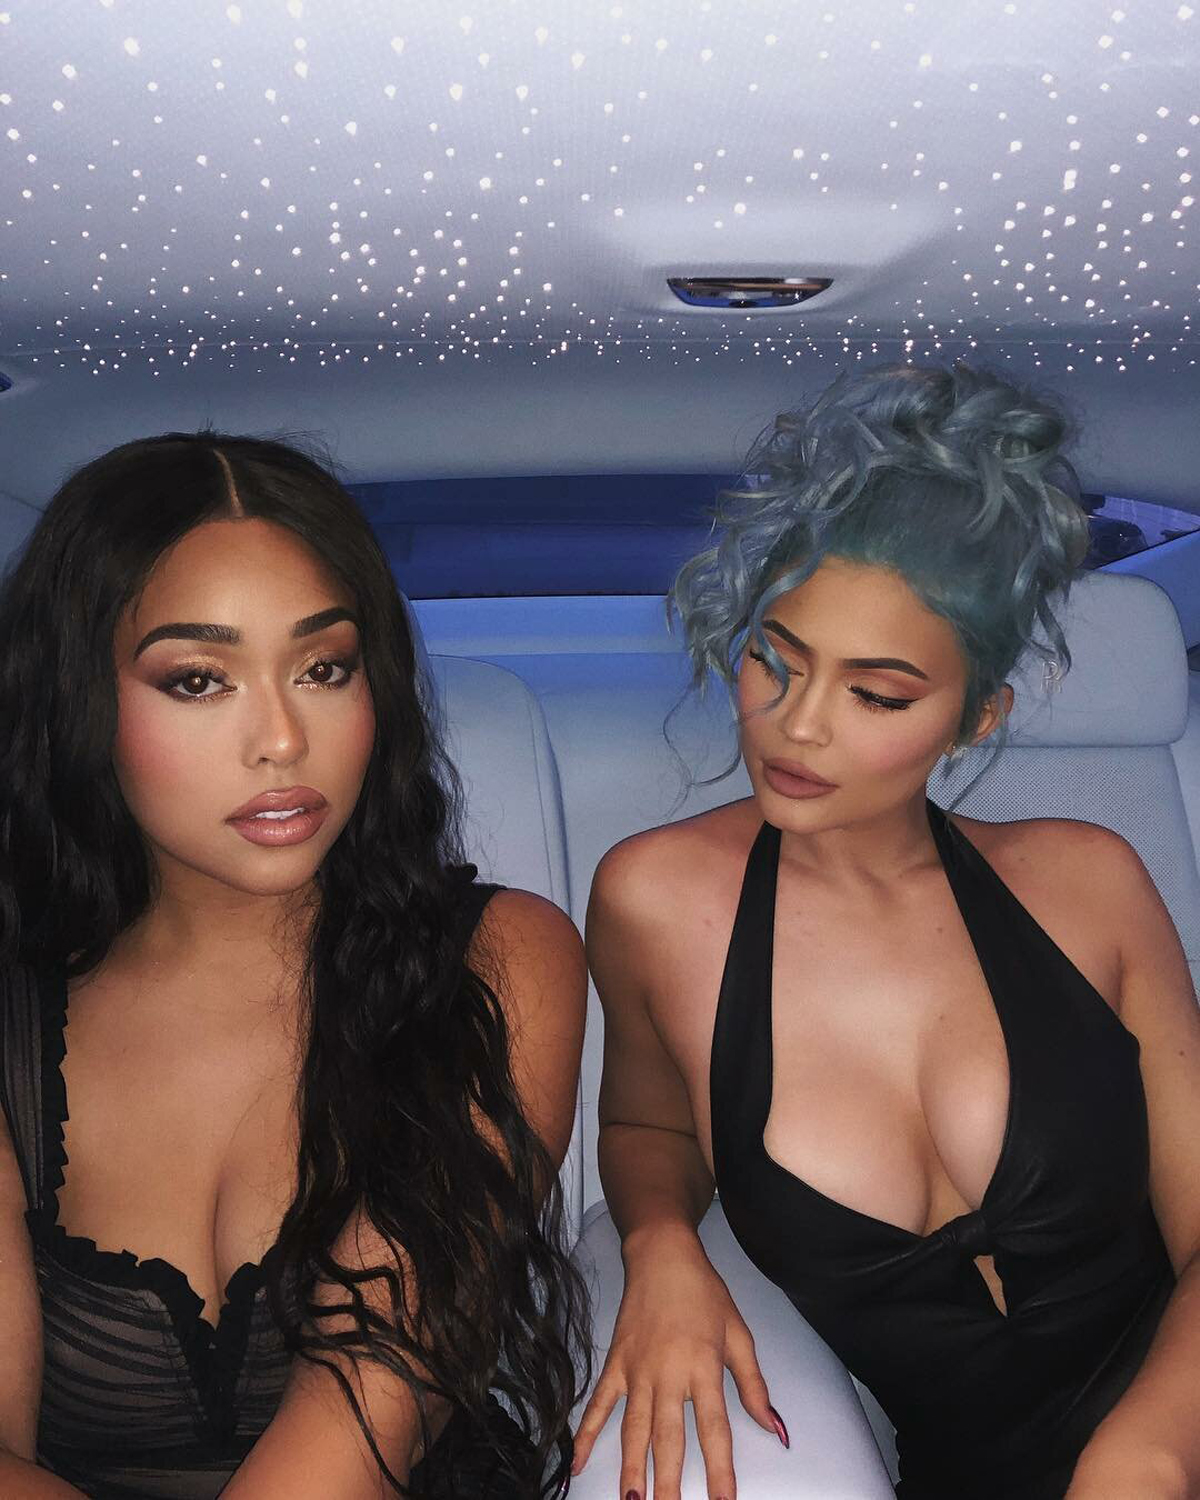 Jordyn Woods took the initiative to reach out to Kylie Jenner